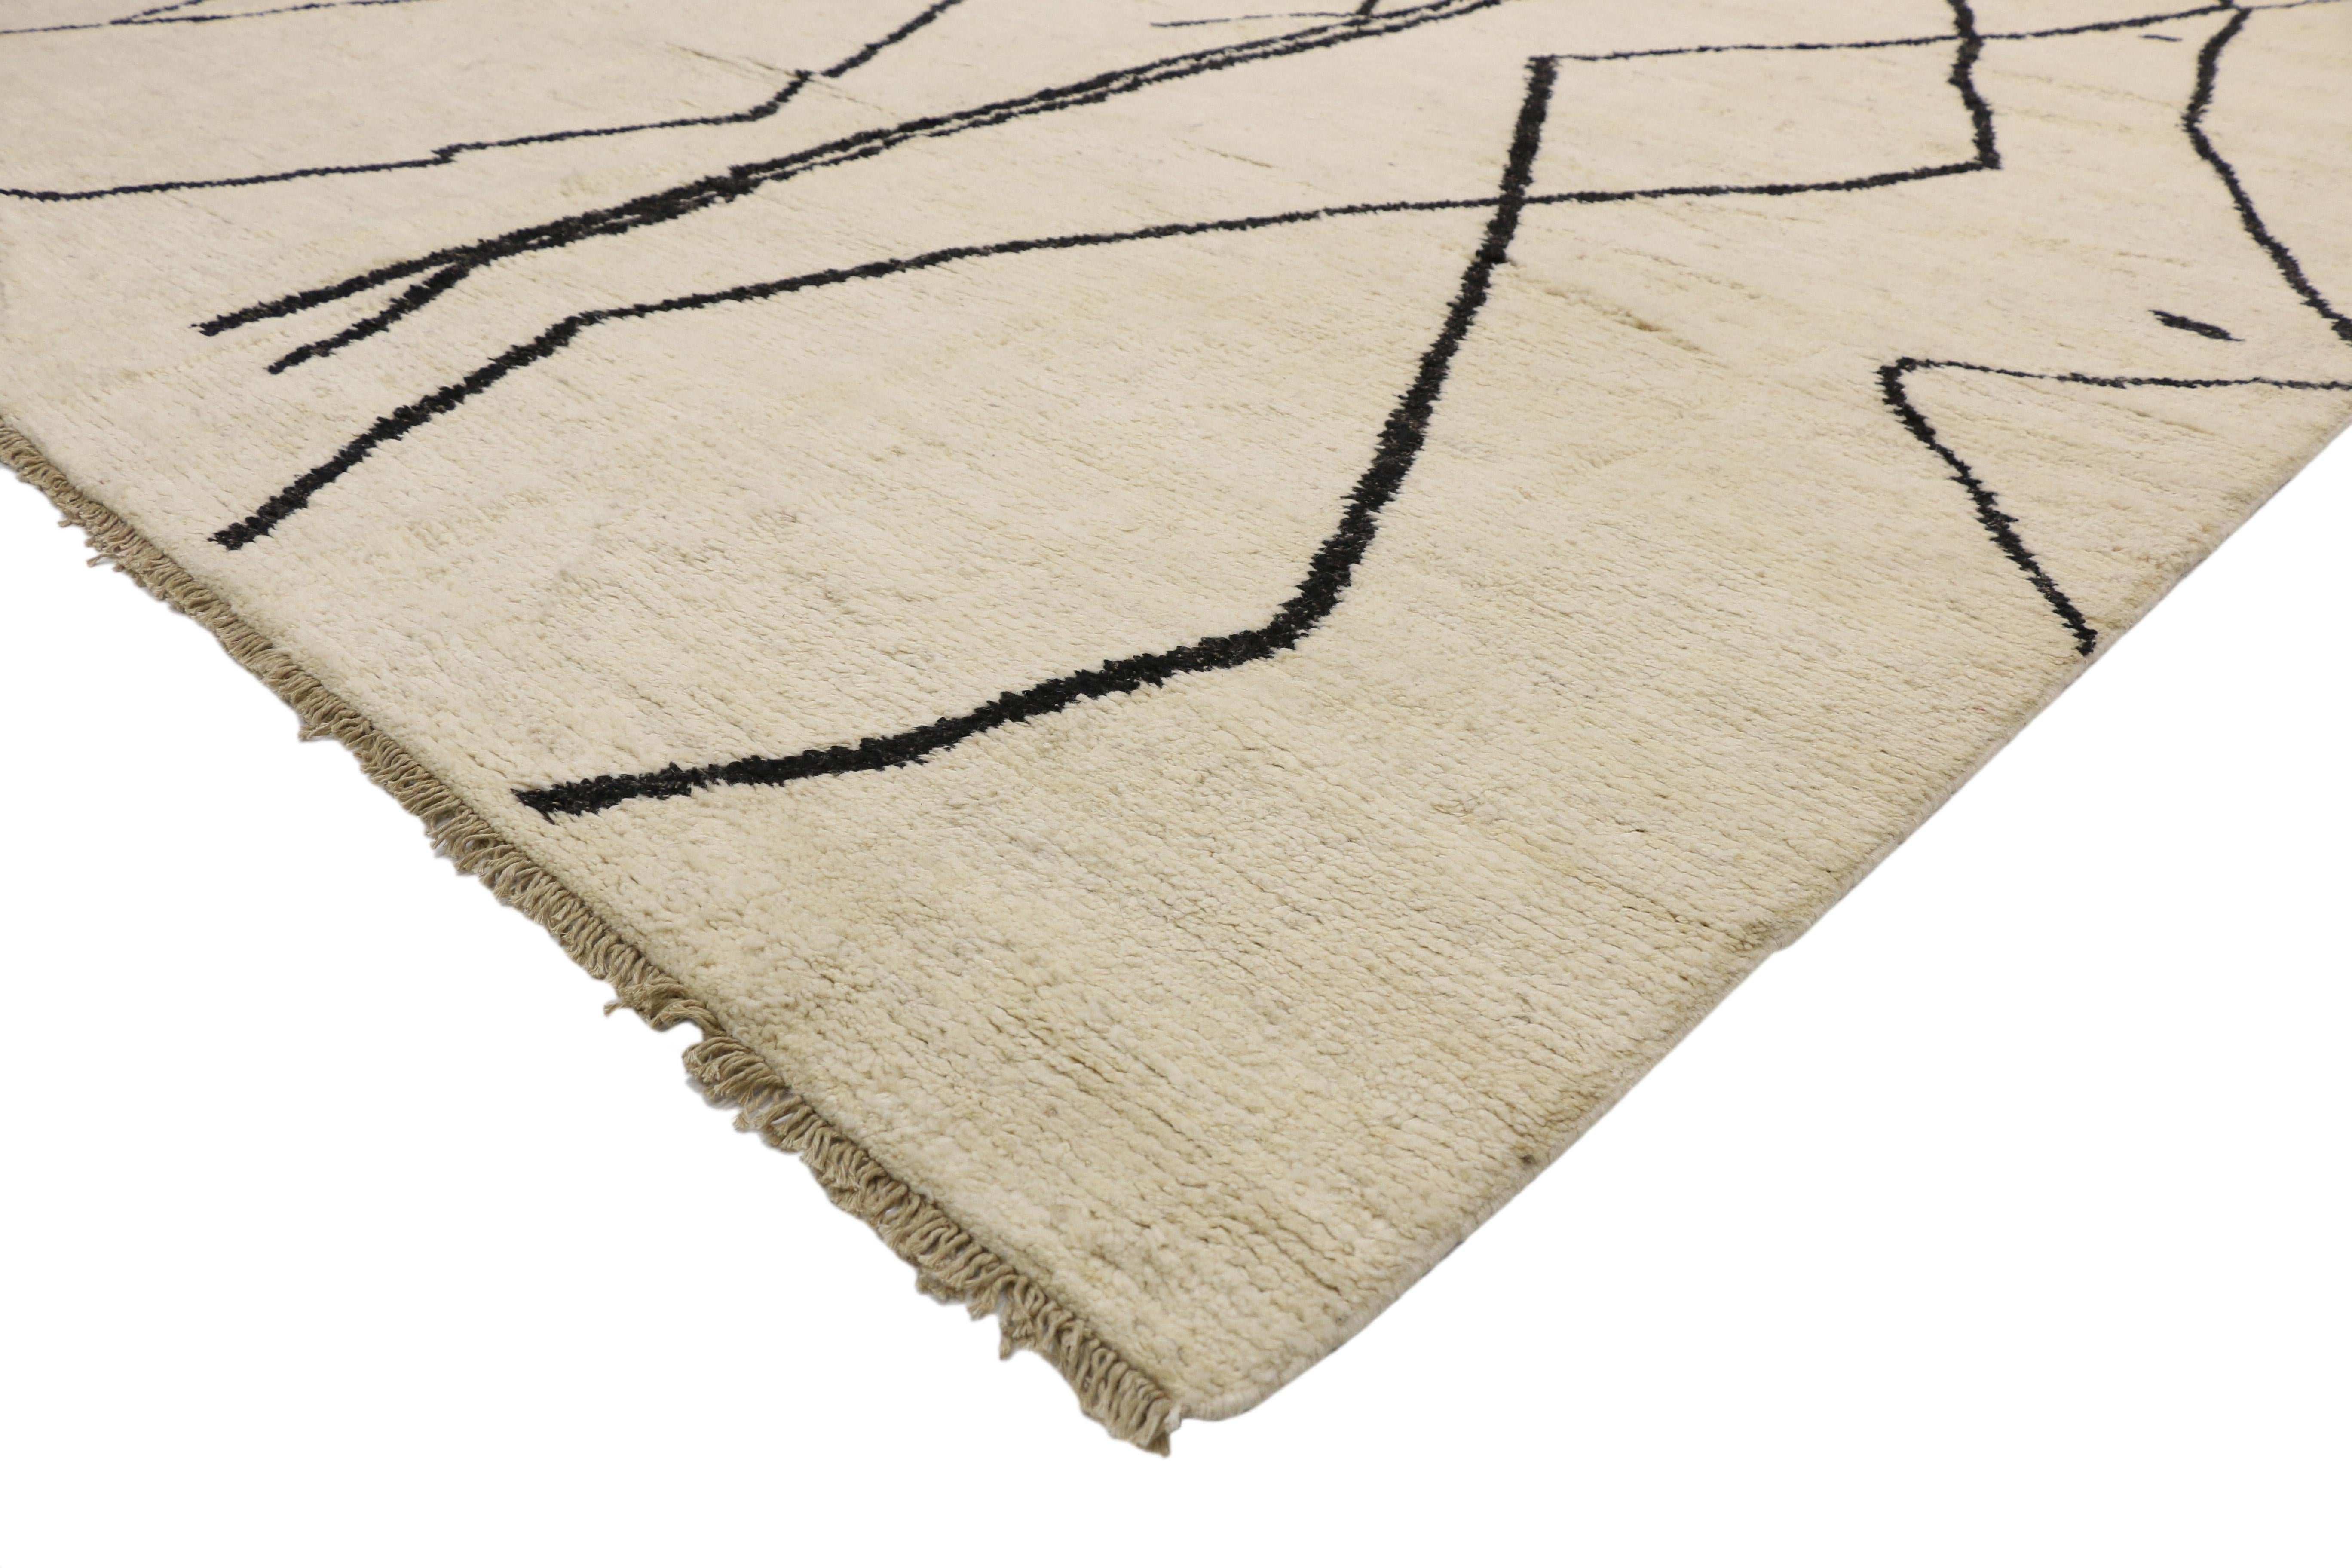 80513 Modern Tribal Moroccan Rug, 10'02 x 13'10. This contemporary Moroccan area rug, meticulously hand-knotted from wool, boasts a striking line art design infused with tribal influences. Against a sandy-beige backdrop, two bold black lines command